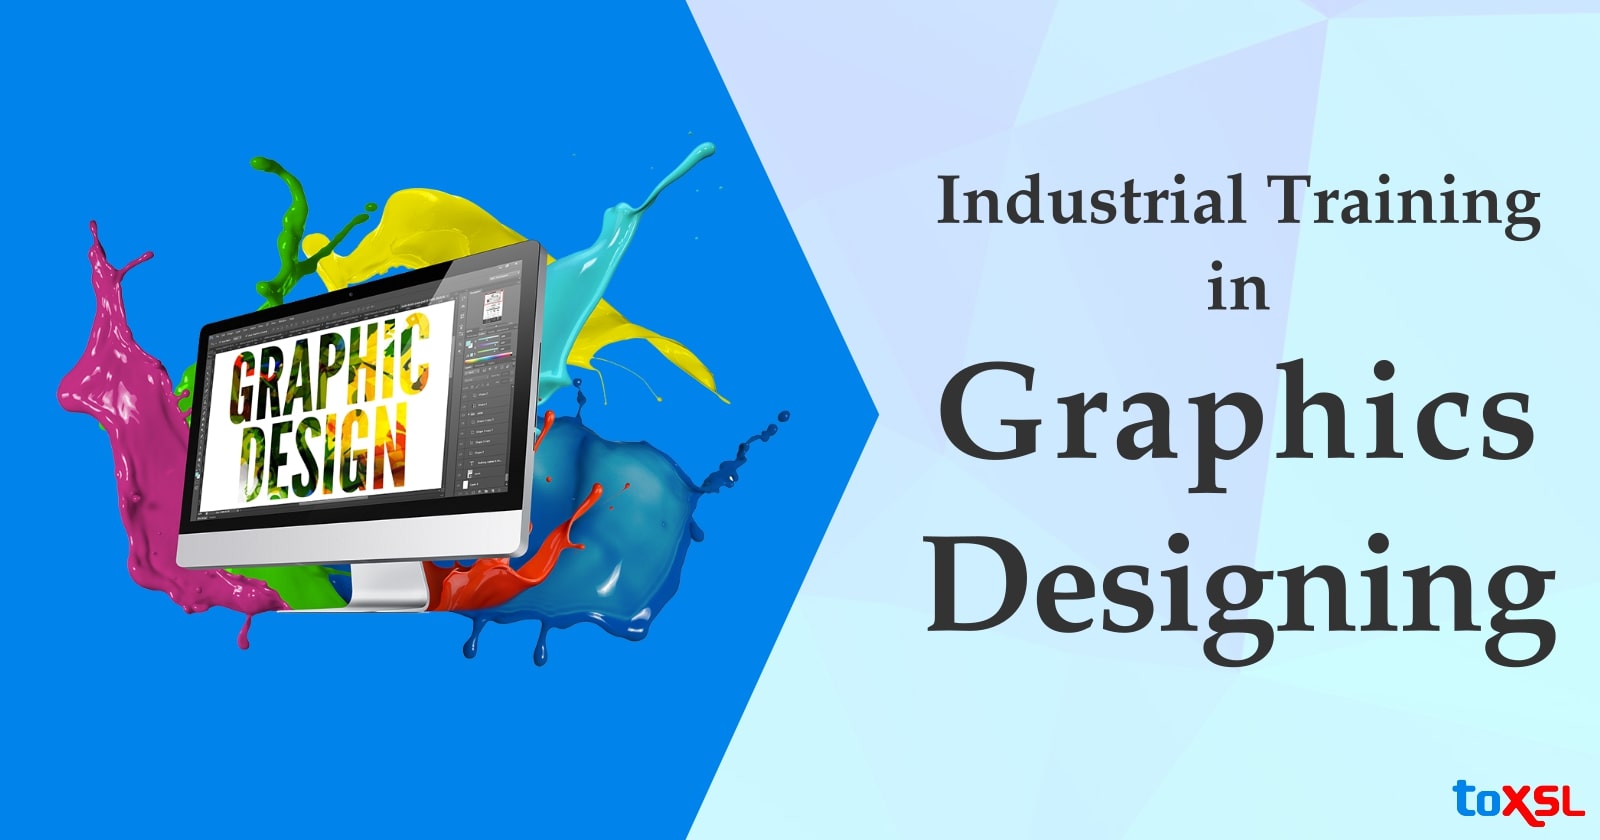 Graphic Designing Industrial Training in ToXSL Technologies